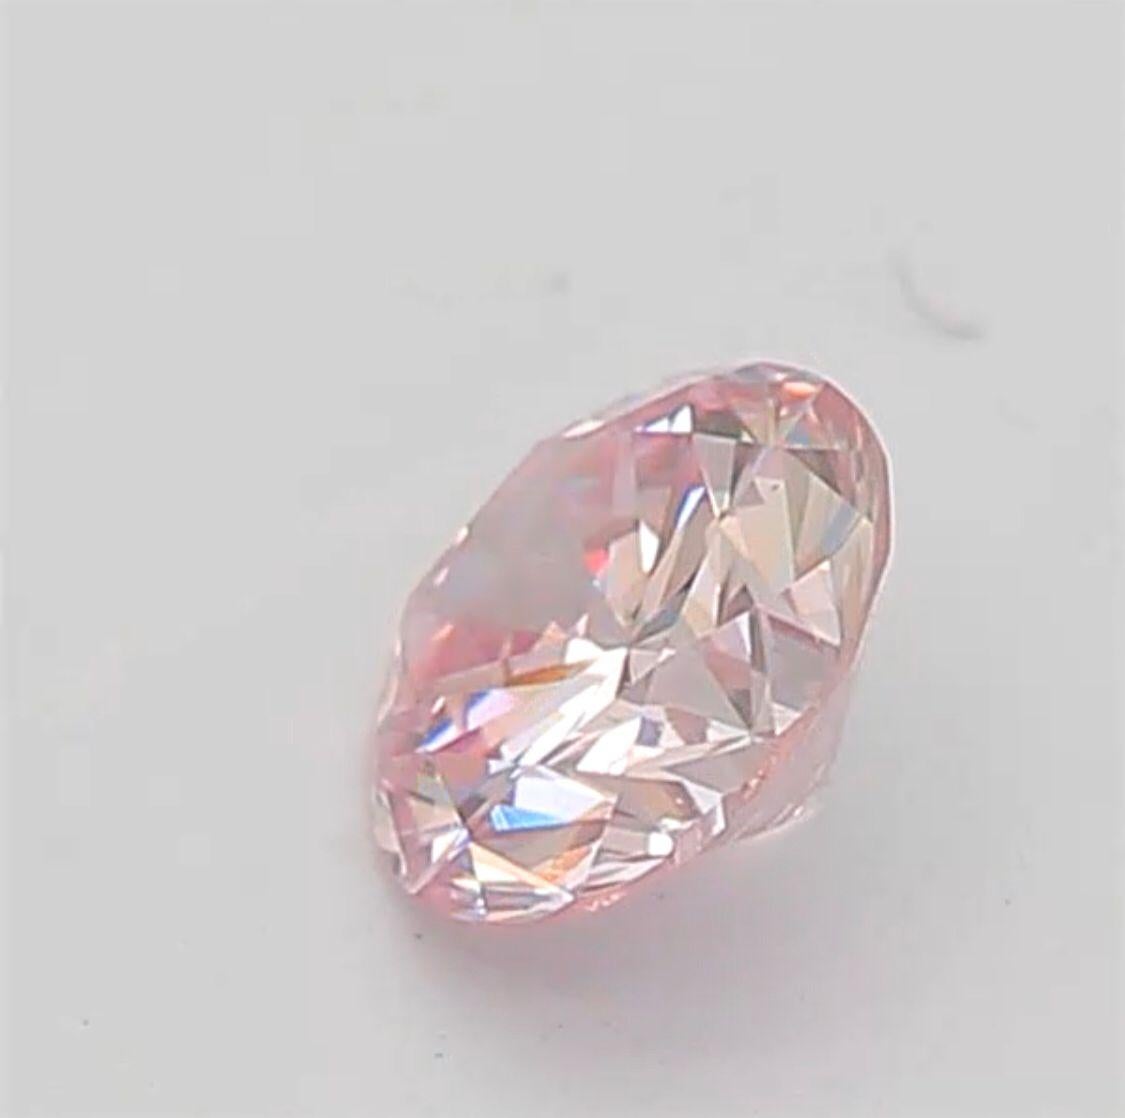 0.20 Carat Very Light Pink Round Shaped Diamond VS1 Clarity CGL Certified For Sale 5